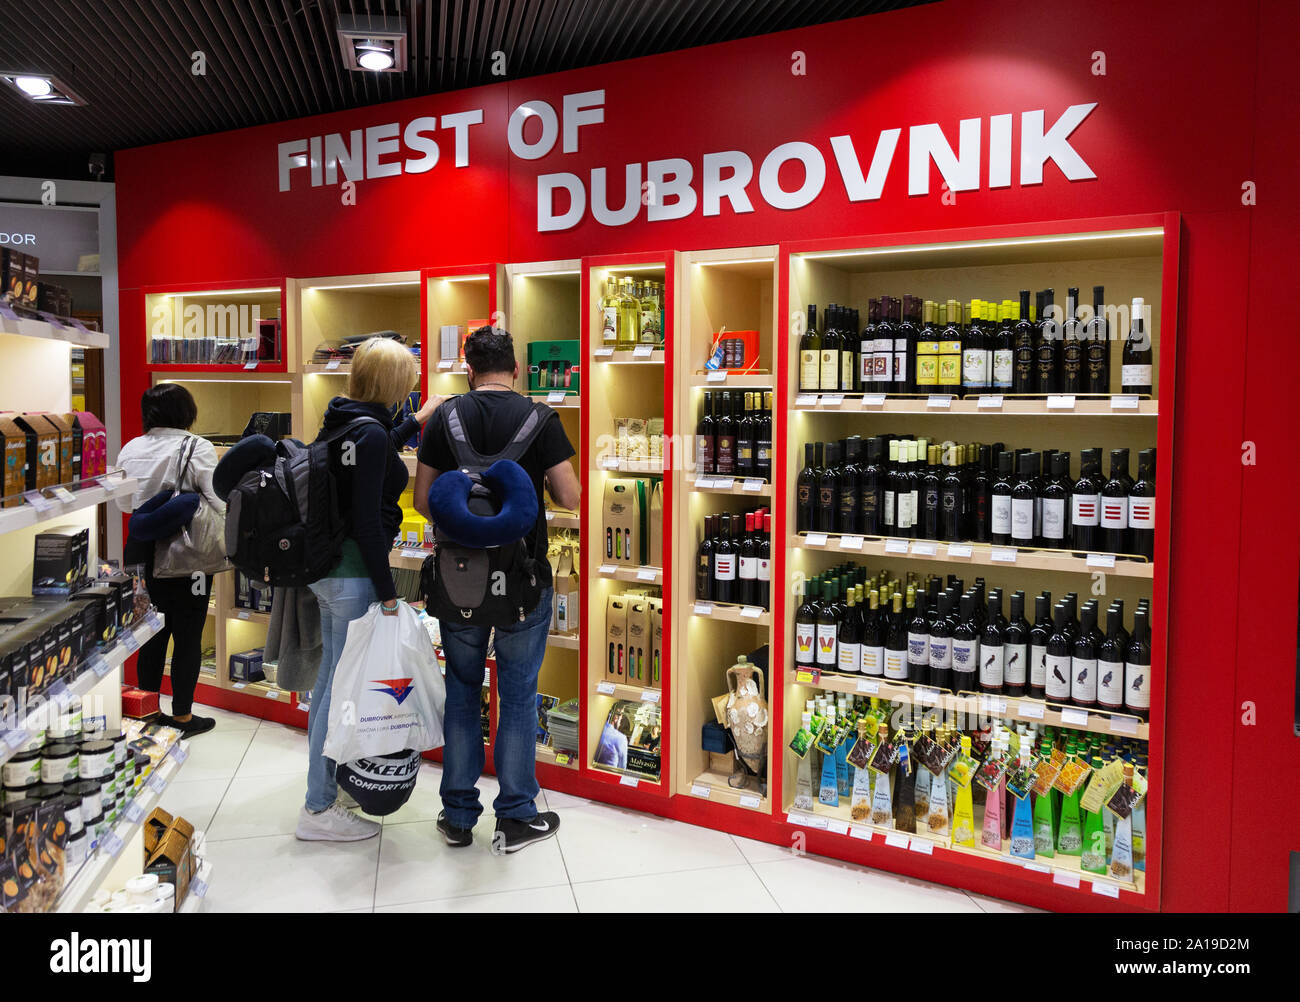 Dubrovnik duty free shop - people shopping in the Duty free shop; Dubrovnik airport, Croatia Europe Stock Photo